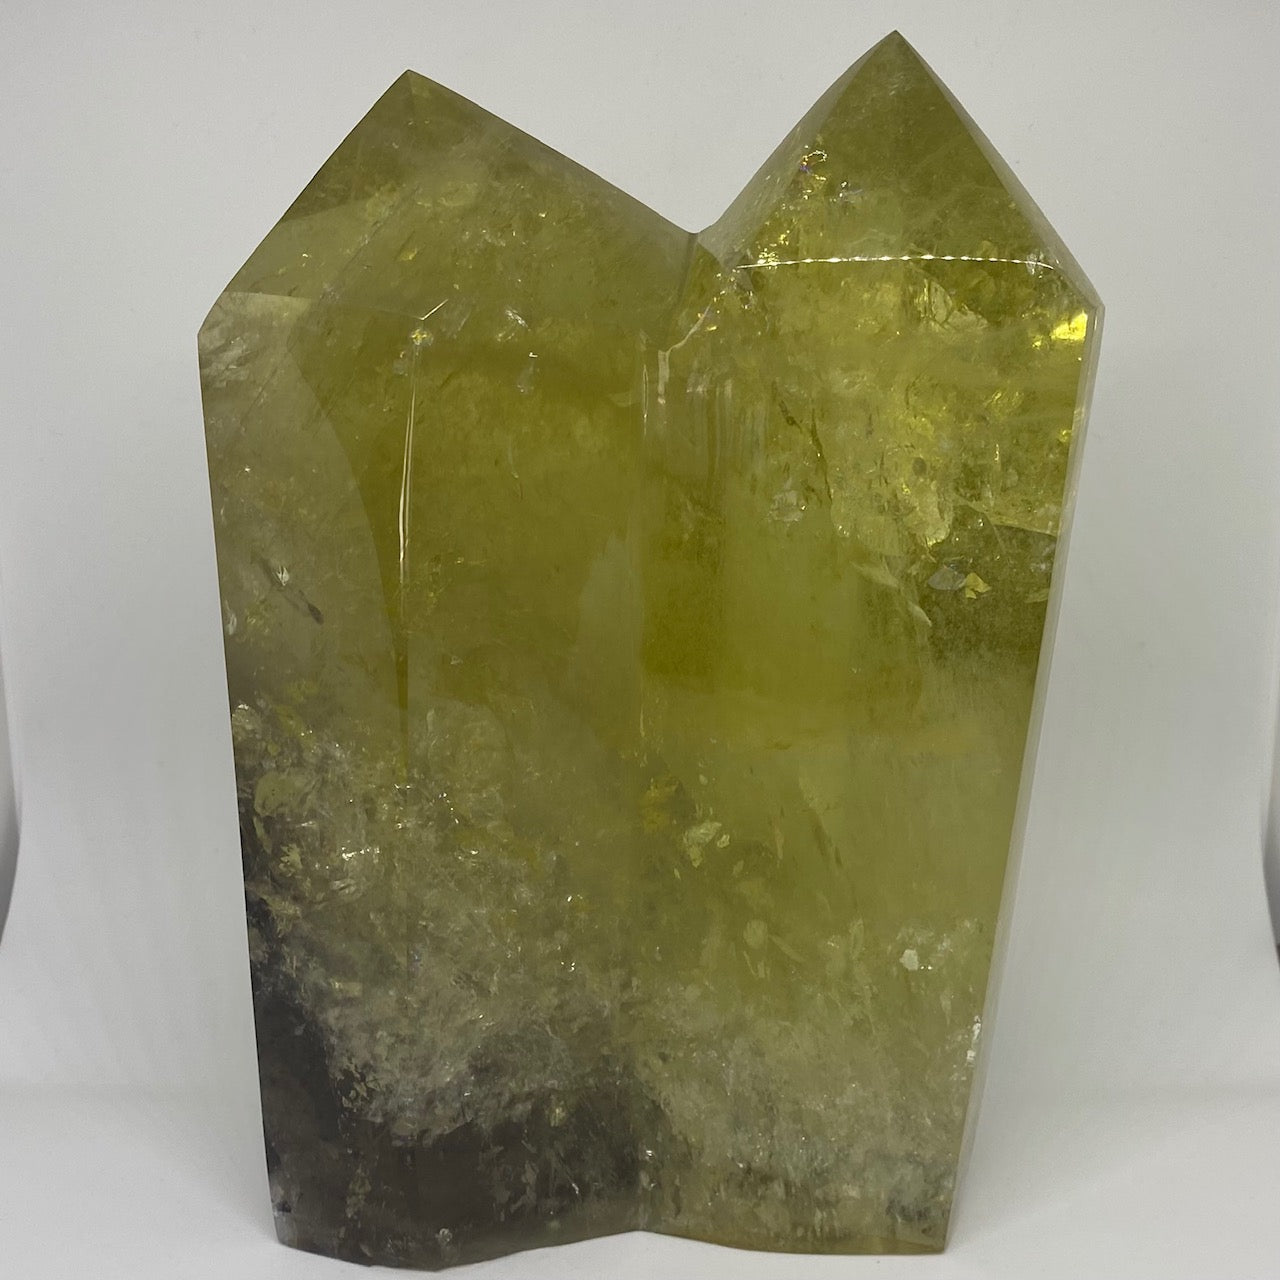 Smoky Citrine Quartz Healing CrystaL - Double Point Huge Tower - 3.3kg